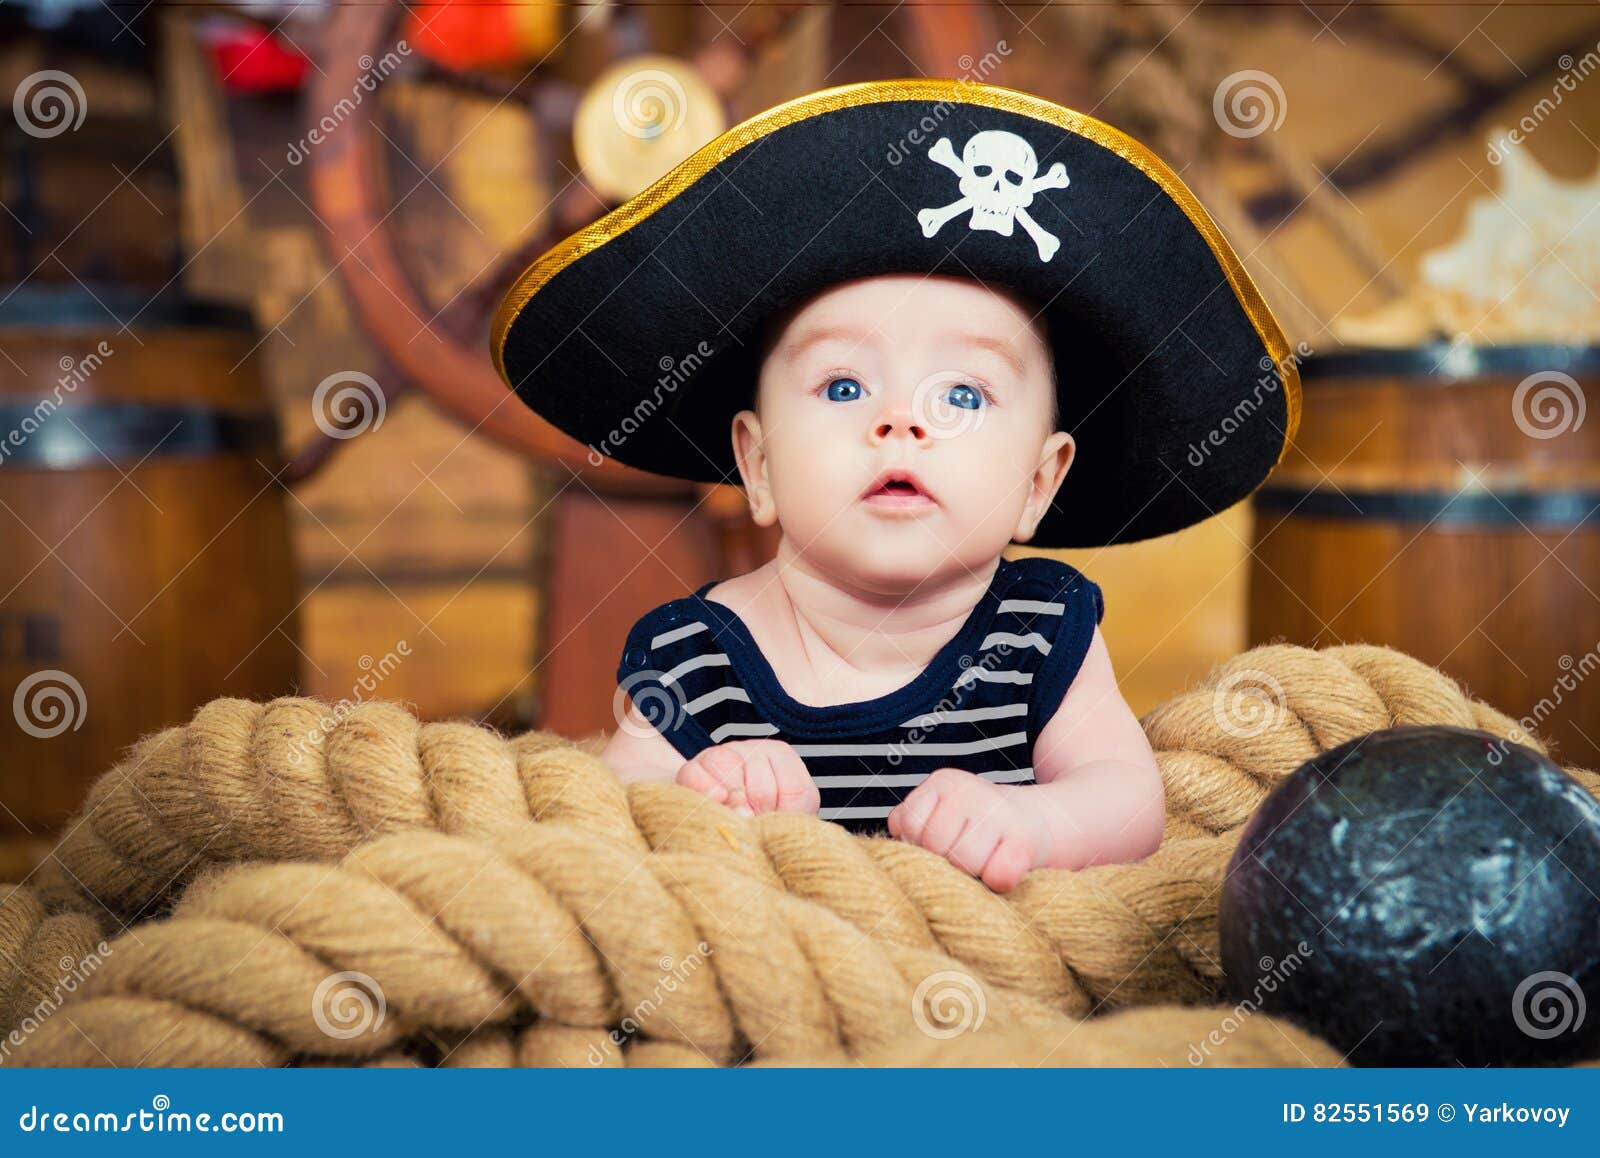 1,983 Pirate Ship Deck Stock Photos - Free & Royalty-Free Stock Photos from  Dreamstime